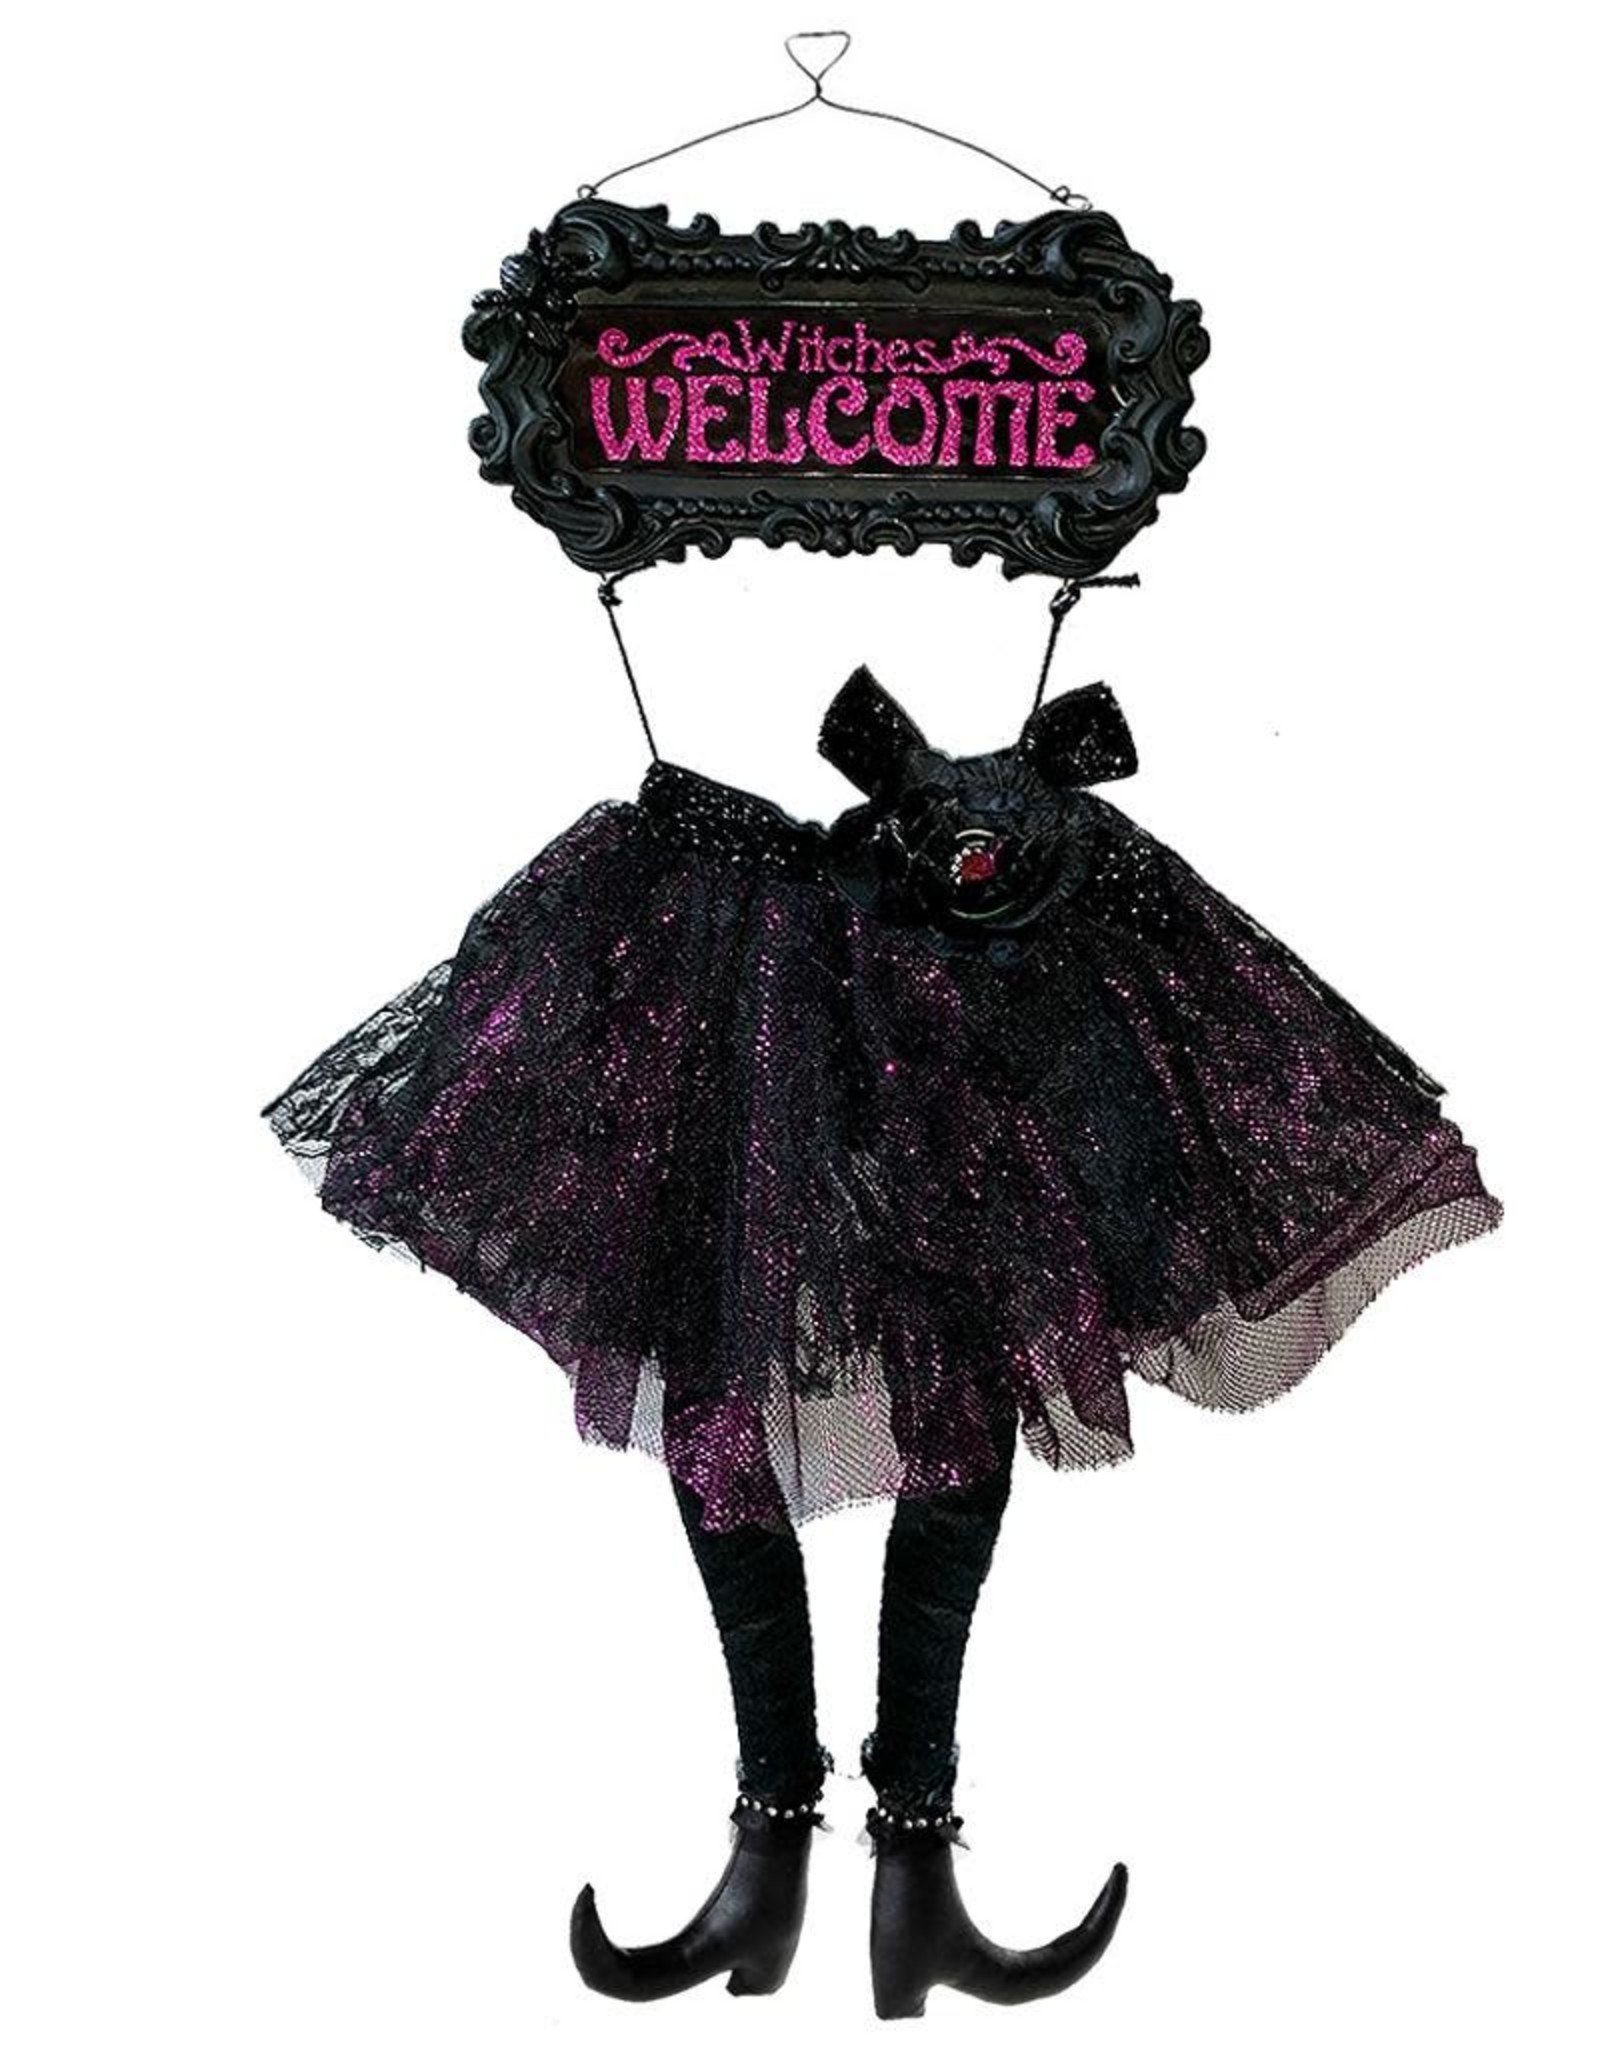 Darice Halloween Witches Skirt And Legs Sign - Witches Welcome